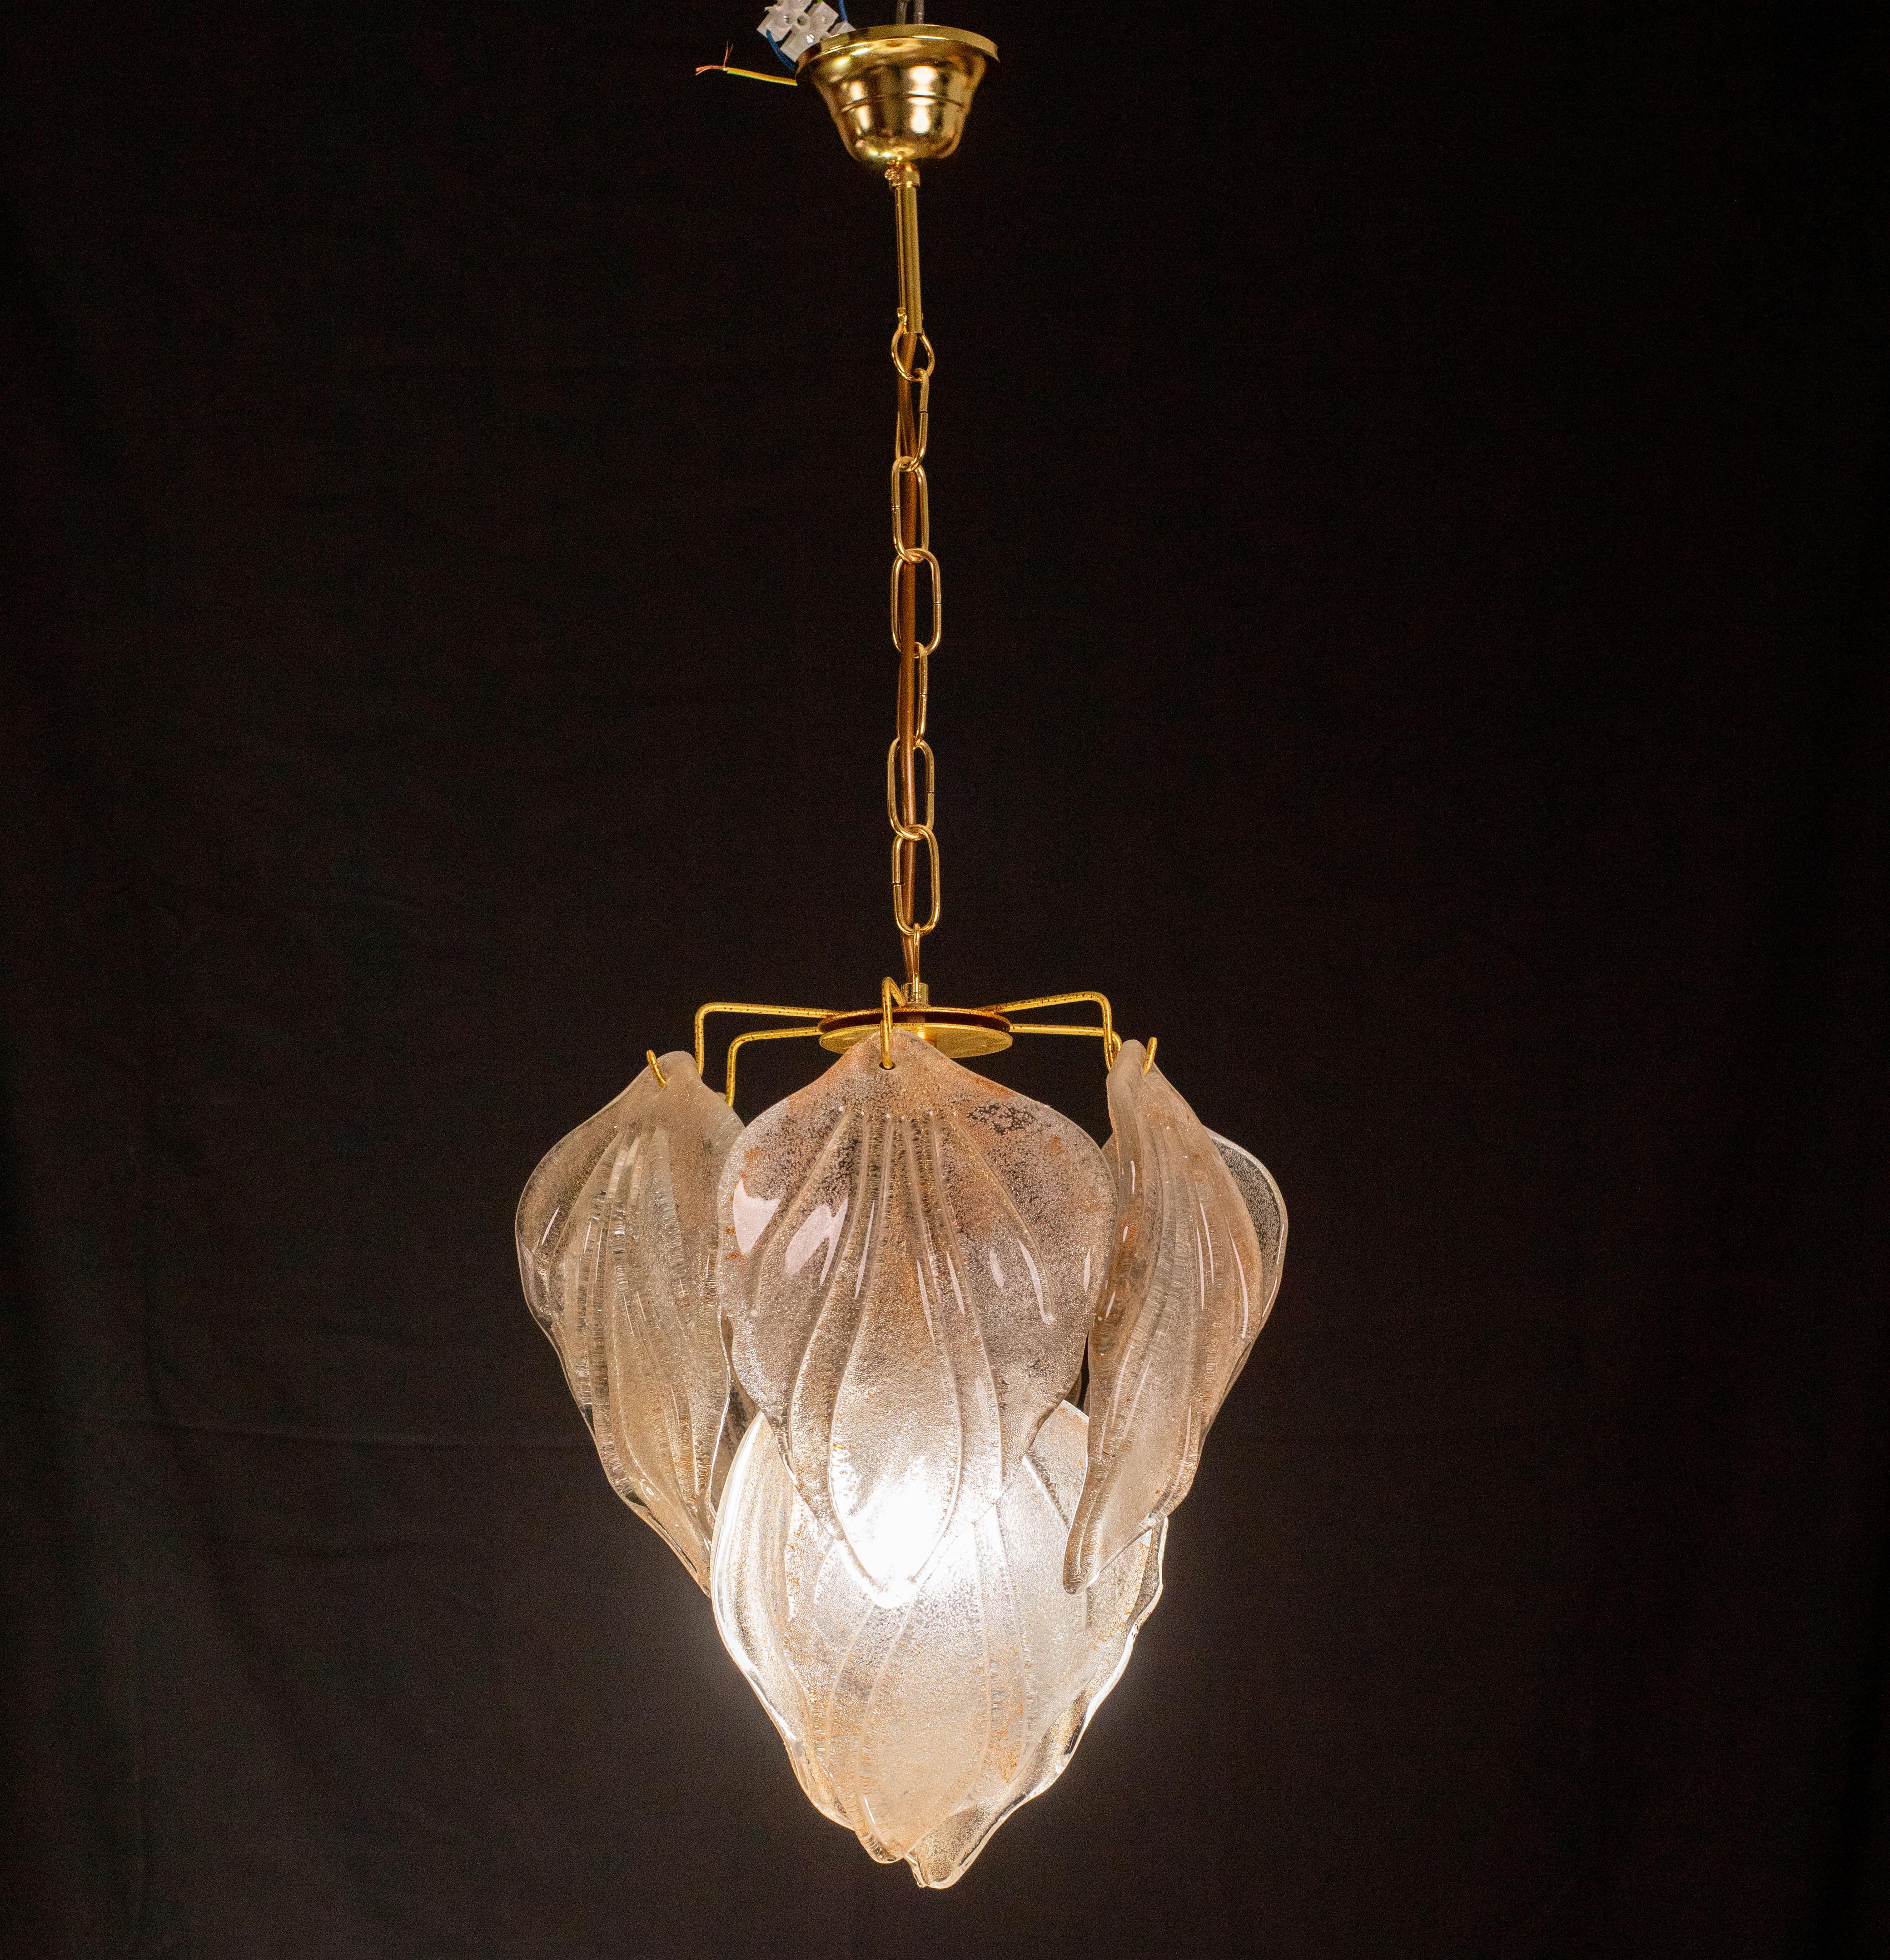 Stunning orange and pink chandelier from Murano, 1980.
The chandelier consists of 9 beautiful orange and trasparent leaves with granulated glass on two levels of turns.
The chandelier mounts a e14 lights, European standard, possible rewire for